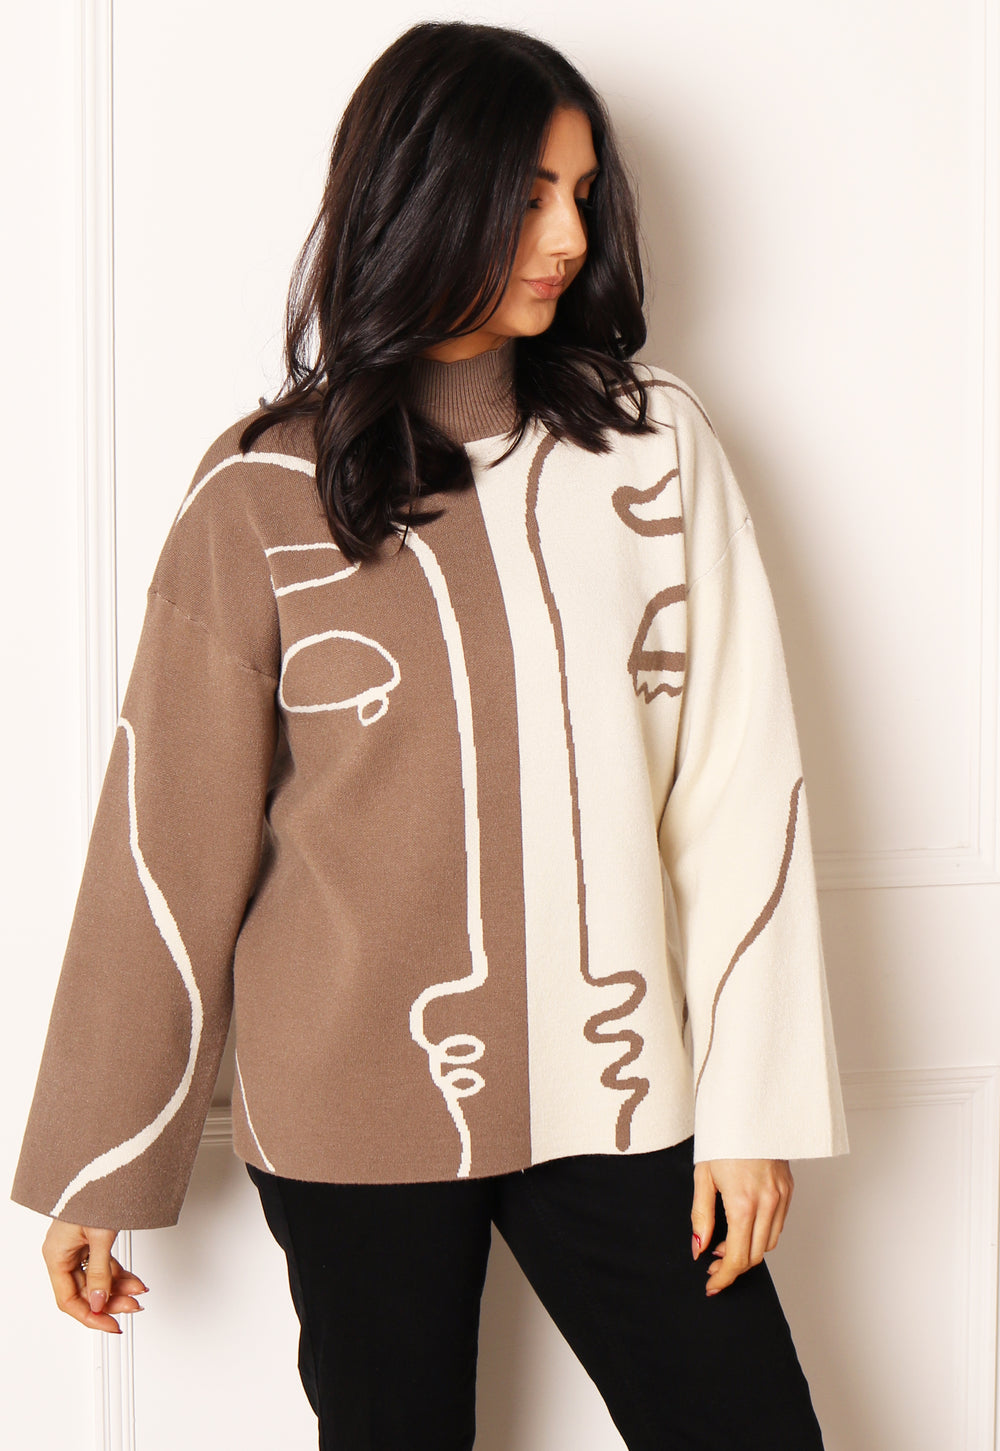 VILA Mee Abstract Faces Two Tone Jumper with Turtle Neck in Cream & Mocha - One Nation Clothing